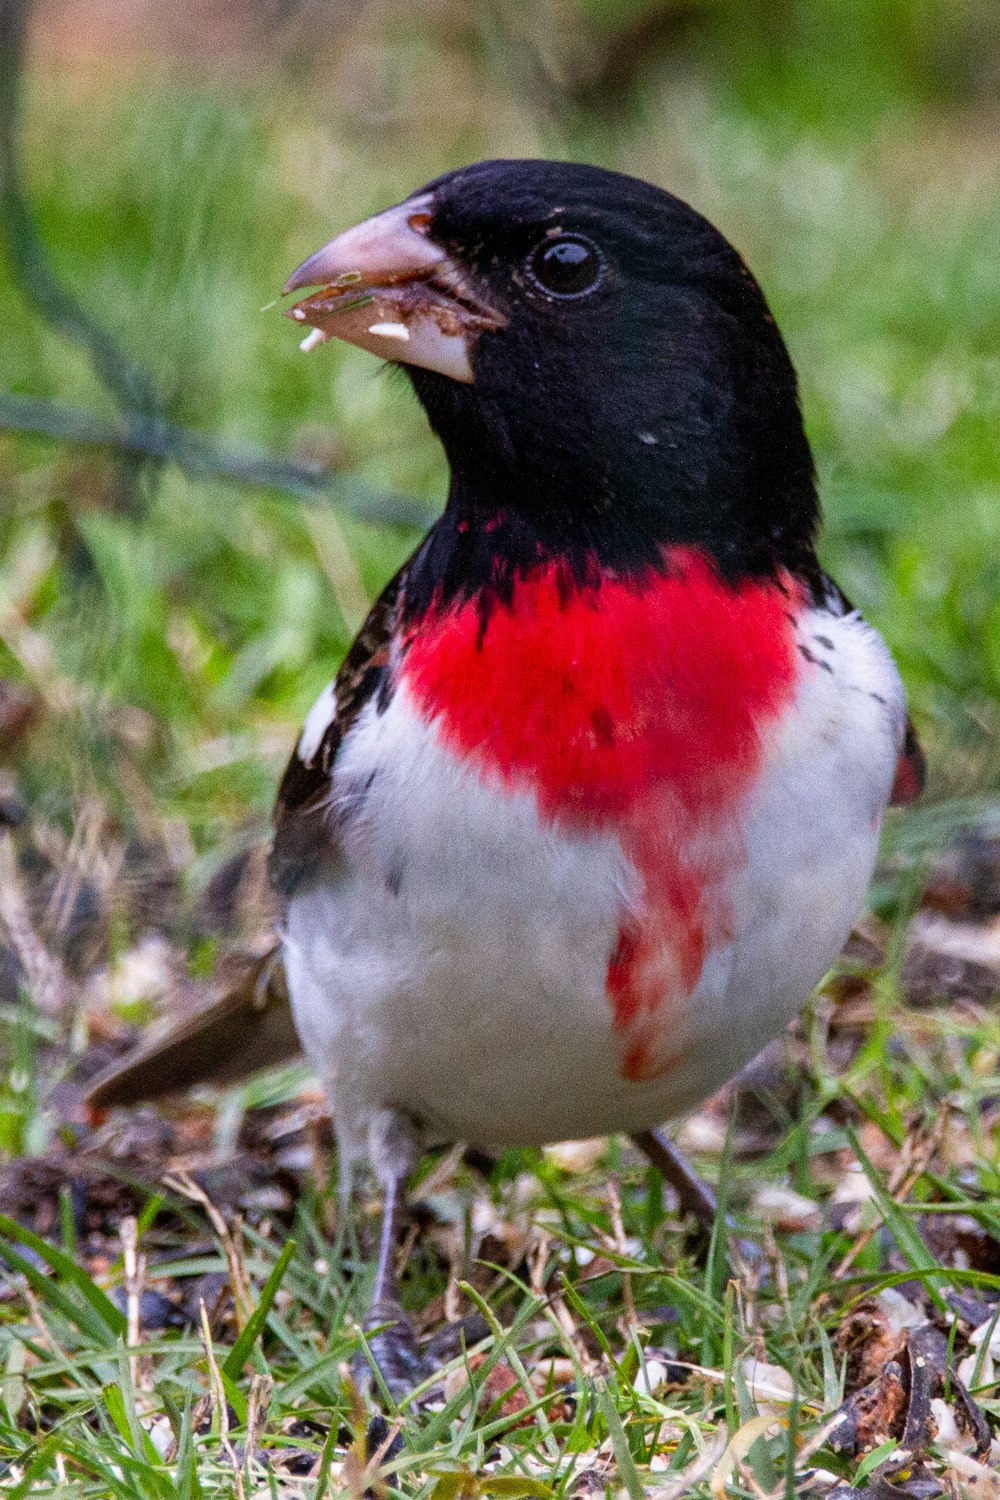 black white and red bird on green grass during daytime